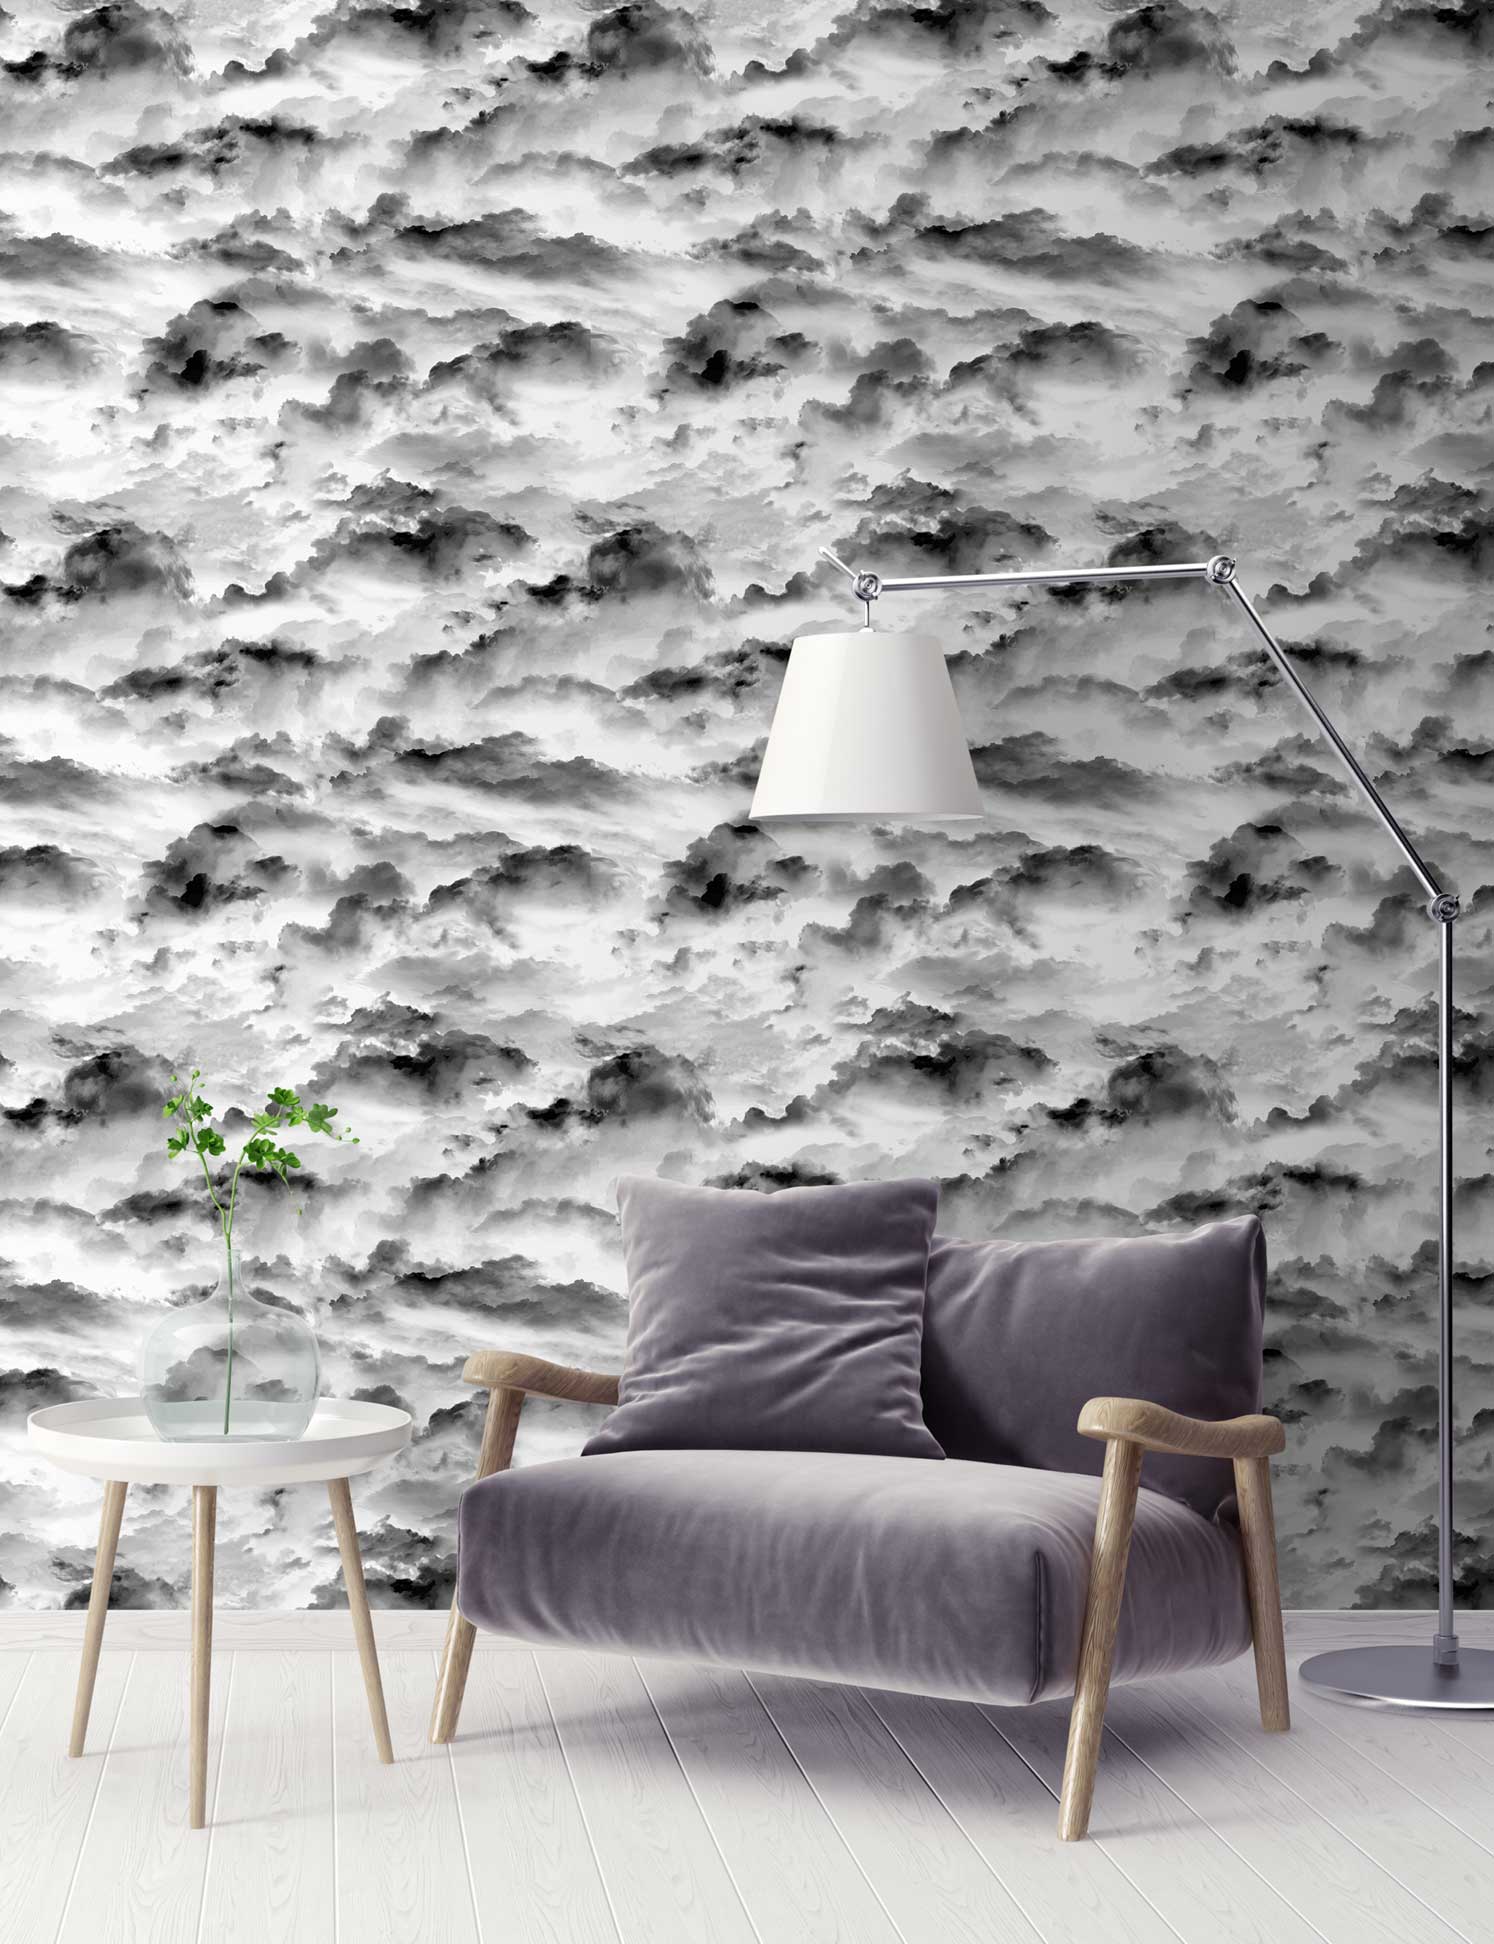 Buy RoseCraft Wallpapers Vinyl Damask Design Wall Ceiling Sticker 57 sqft  Online in India at Best Prices